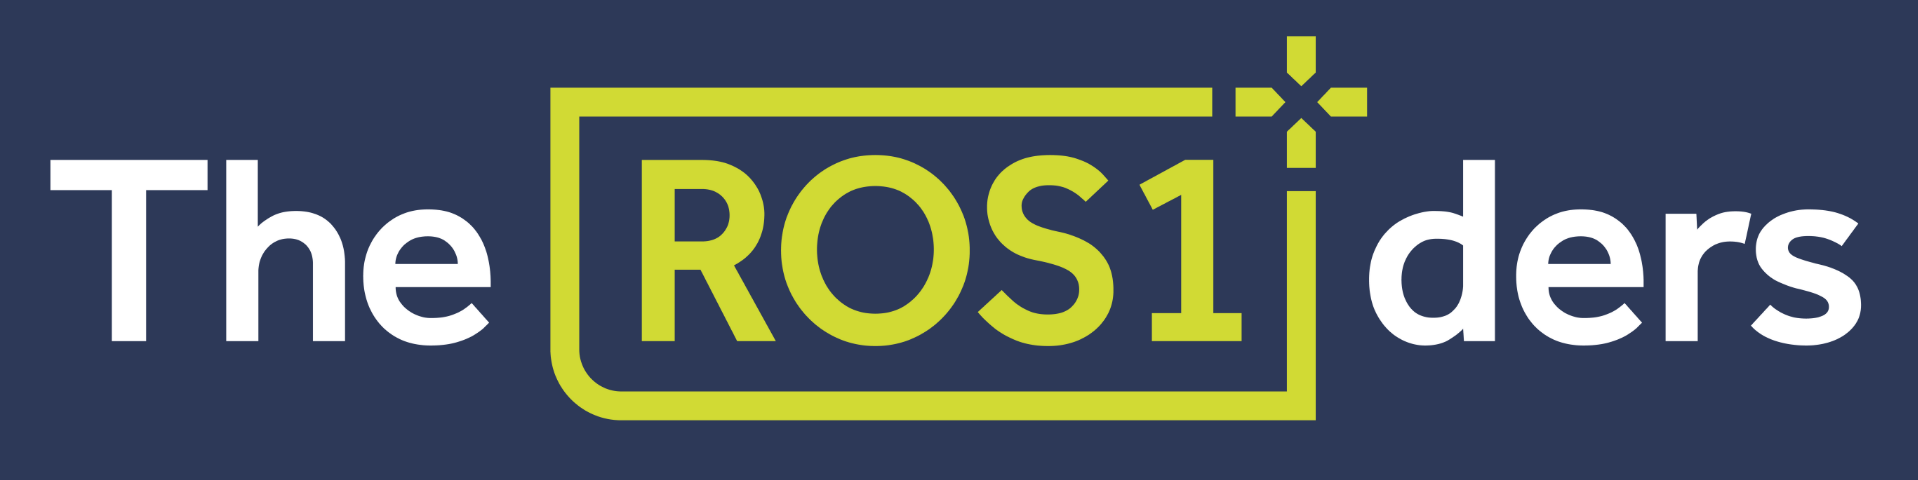 The ROS1ders Logo